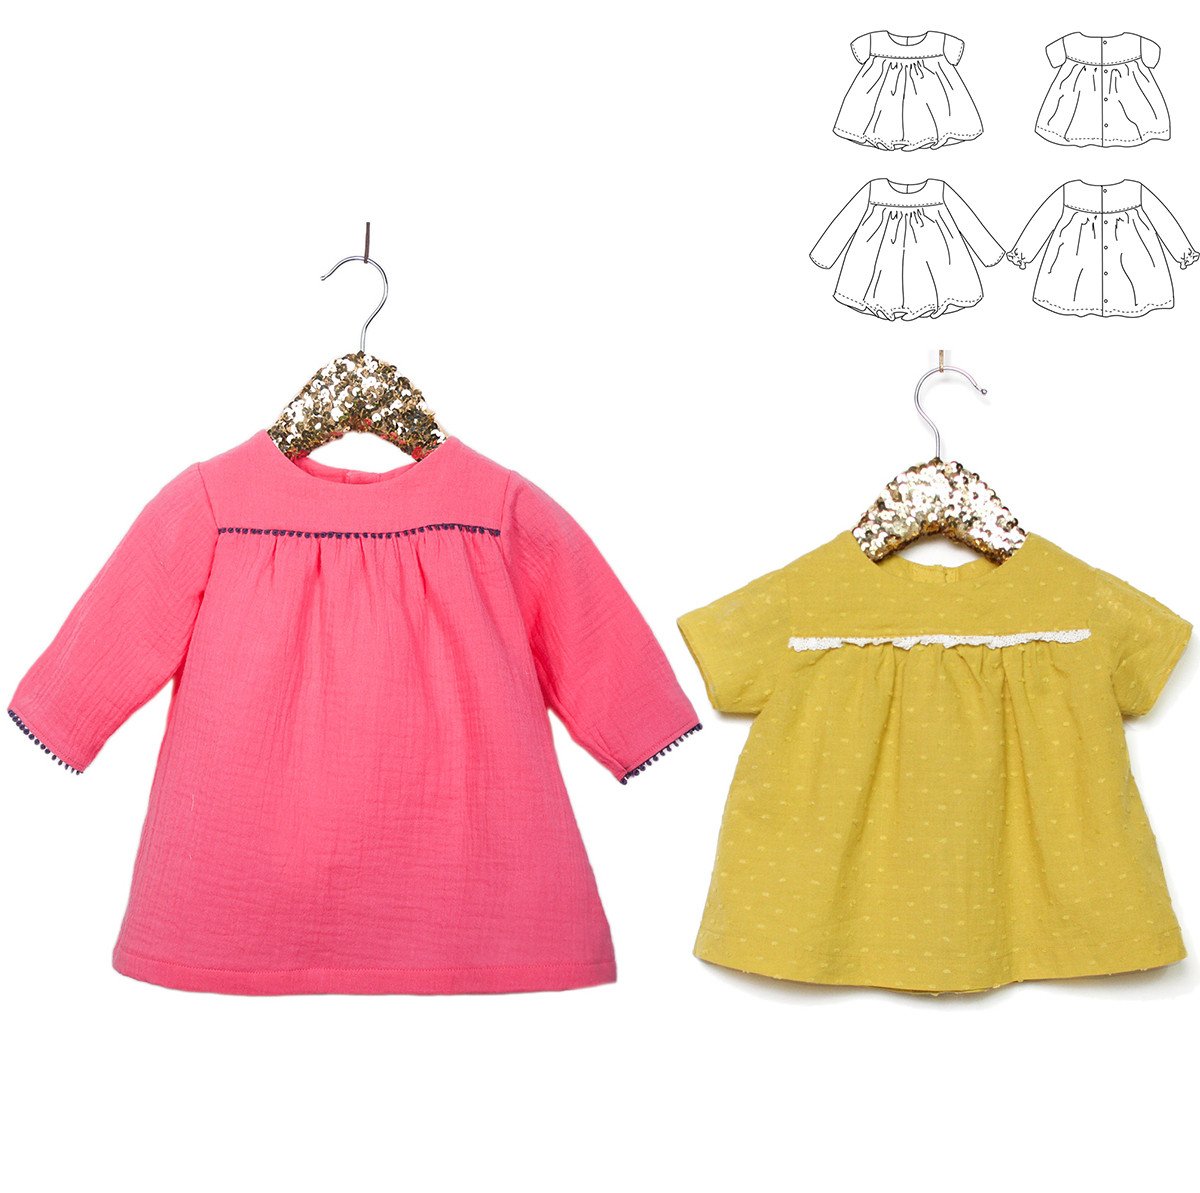 Ikatee - OSLO  Blouse -Dress Ages  6-24 Months 3-4 Years  Paper Sewing Pattern